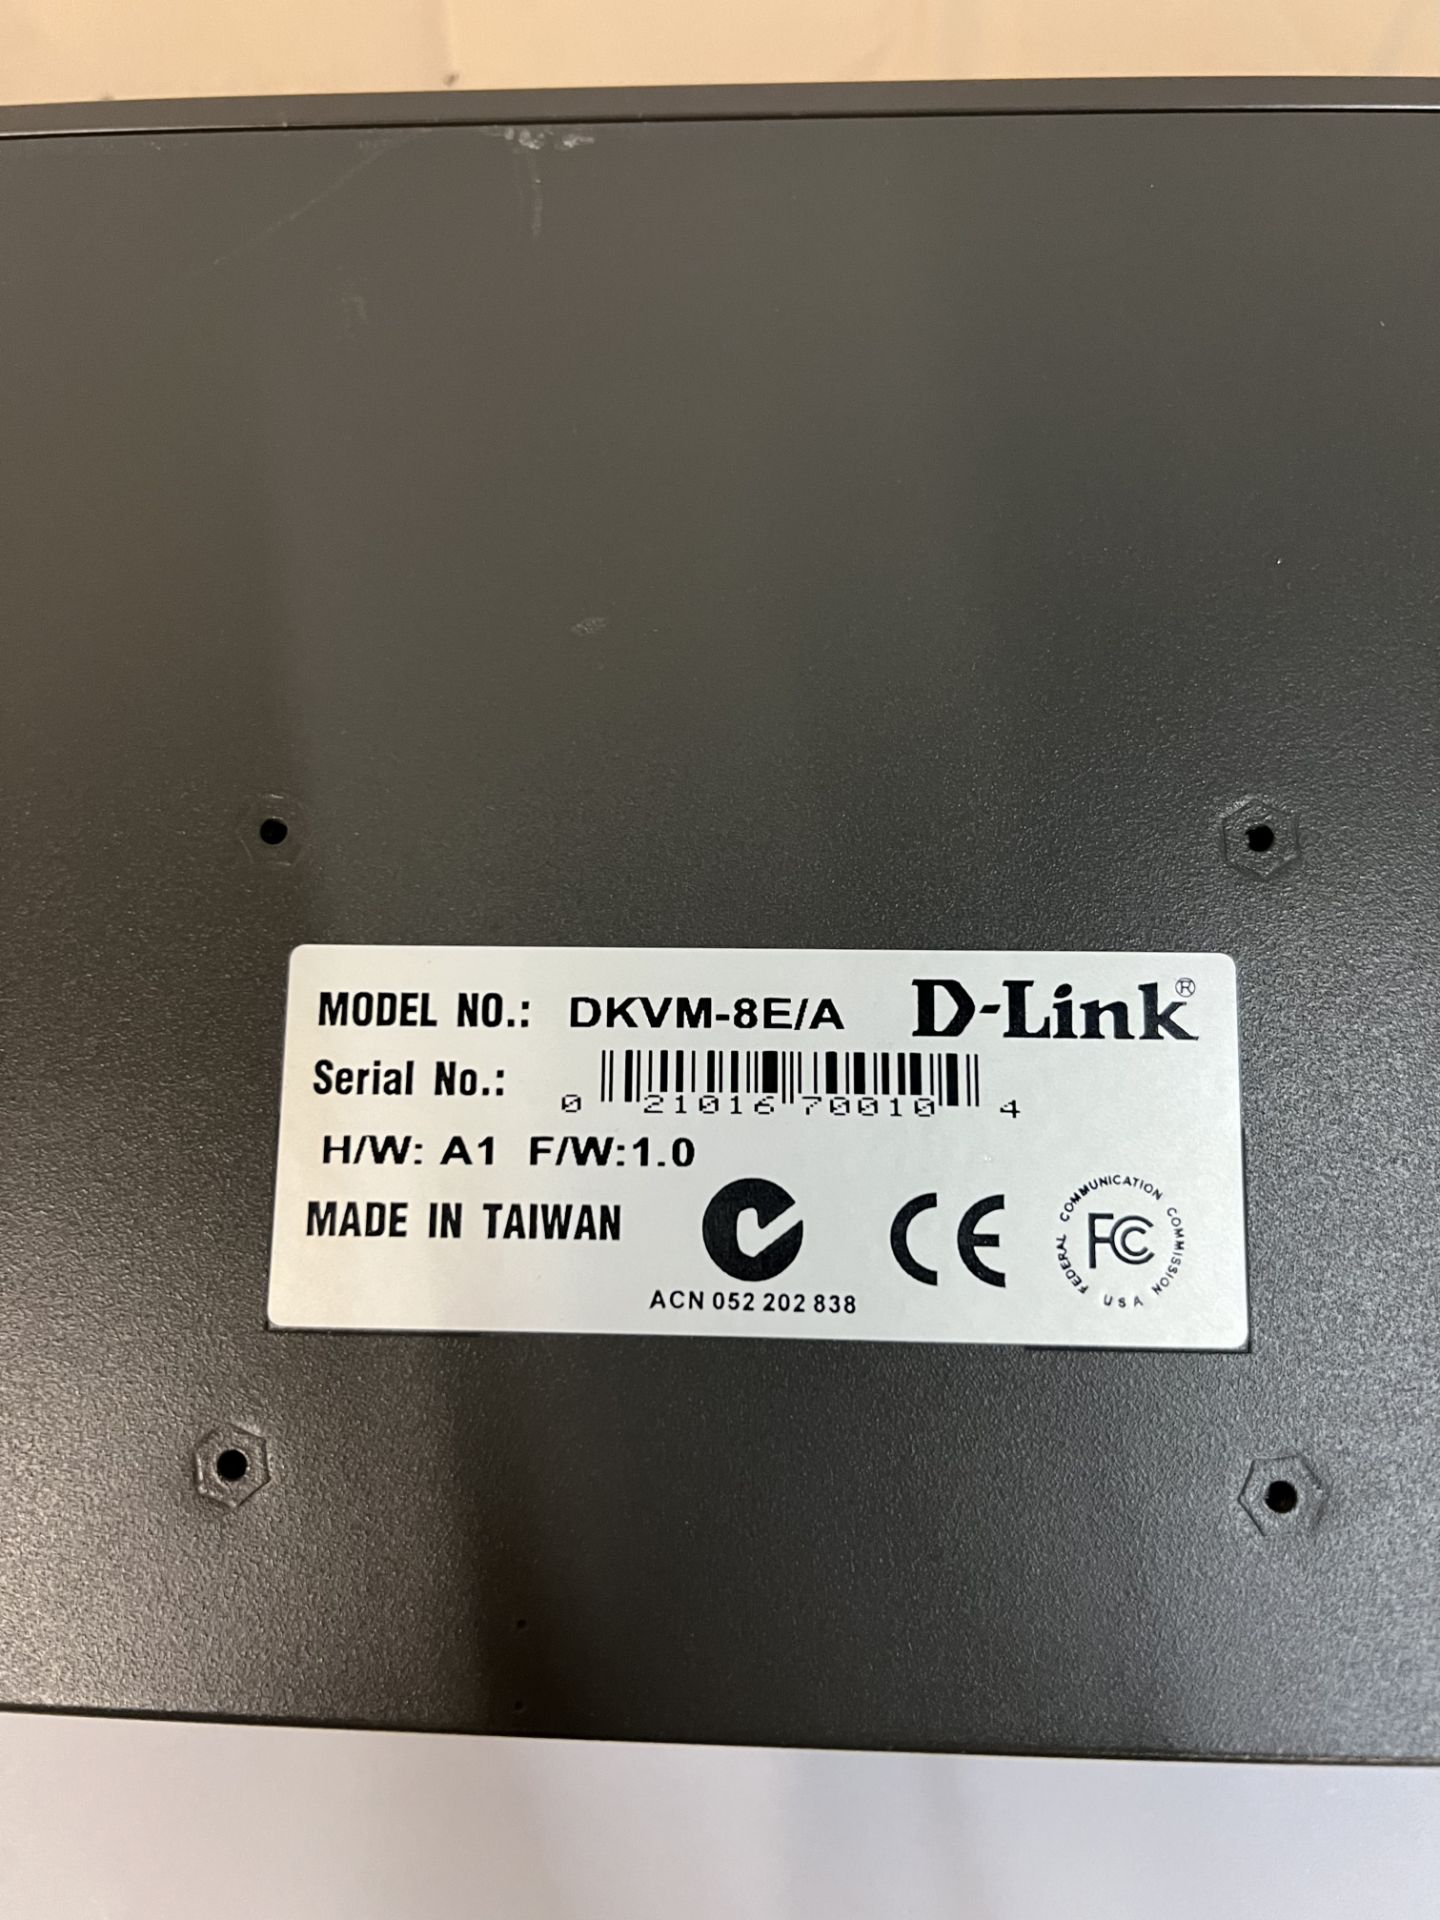 D-LINK DKVM-8E/A 8-PORT KVM SWITCH (INCLUDES POWER CORD), S/N 21016700104 (LOCATED IN TORONTO, - Image 2 of 2